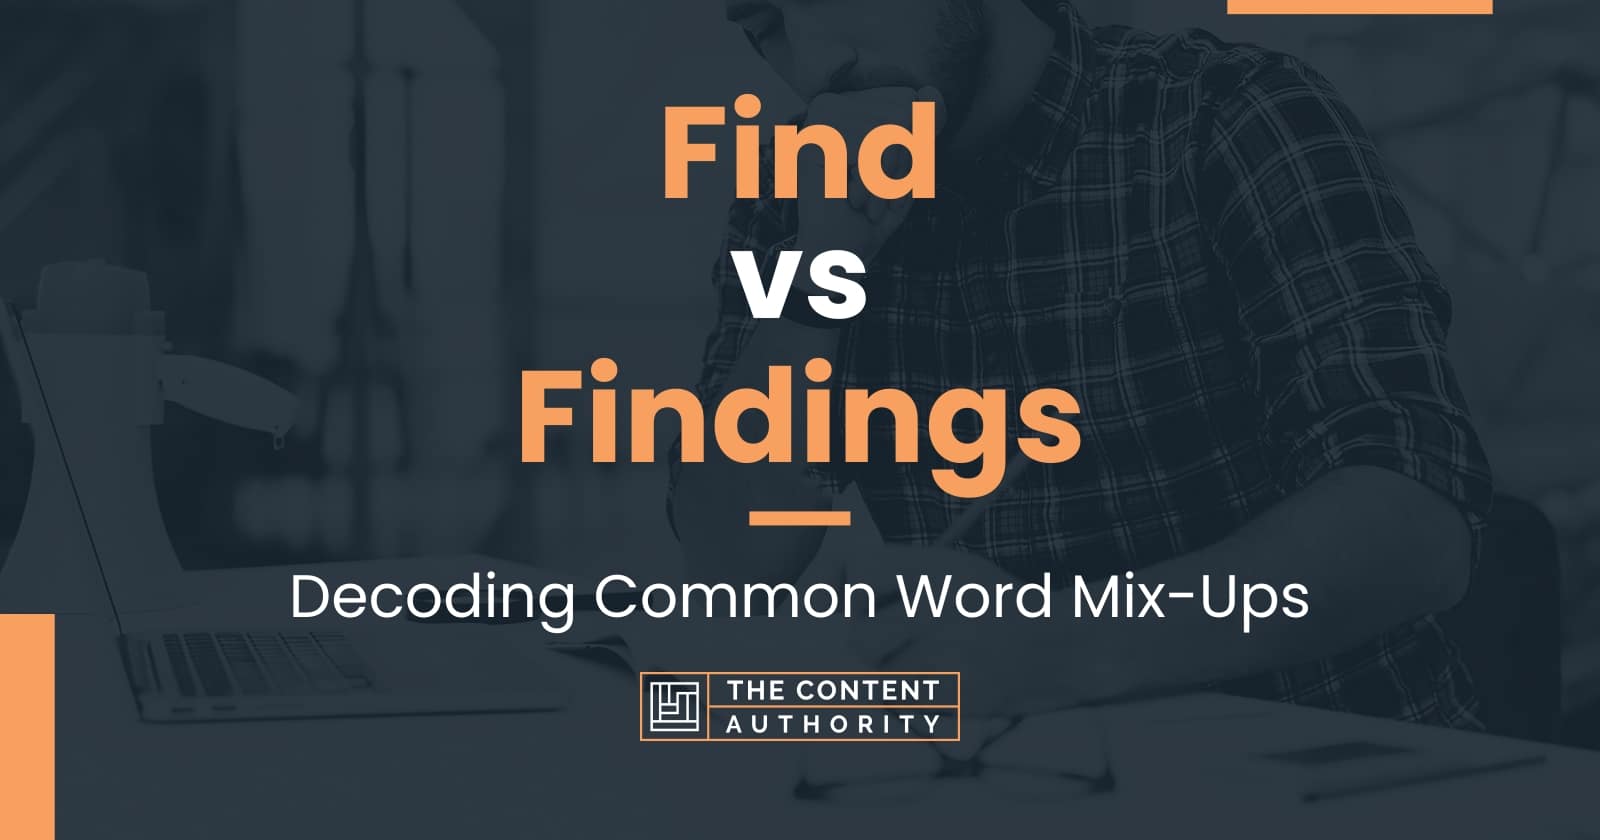 find-vs-findings-decoding-common-word-mix-ups